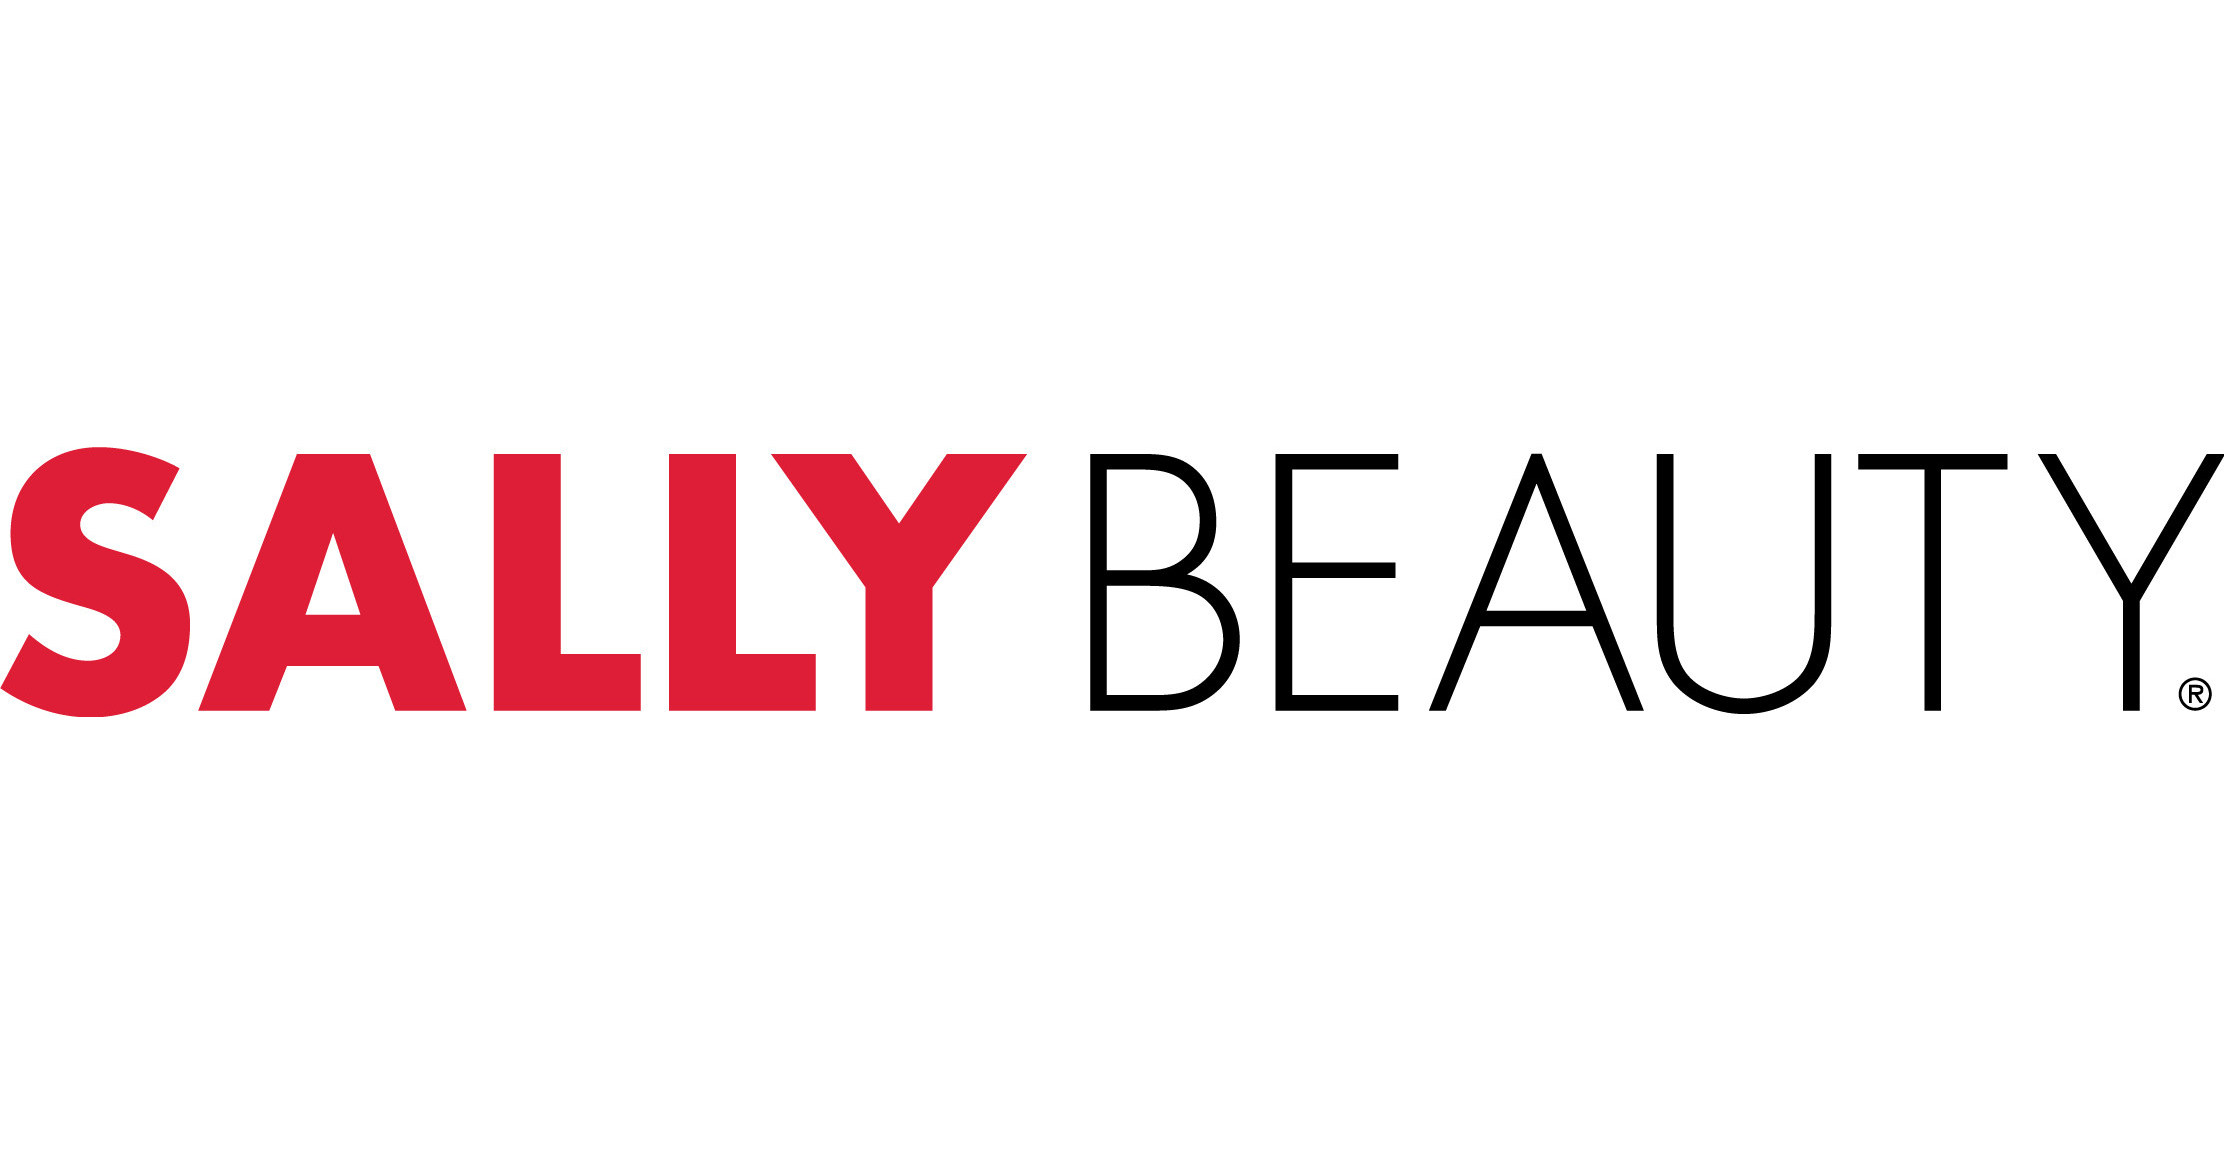 Sally Beauty Is Saving Shoppers Time And Money This Holiday Season Through DoorDash Partnership